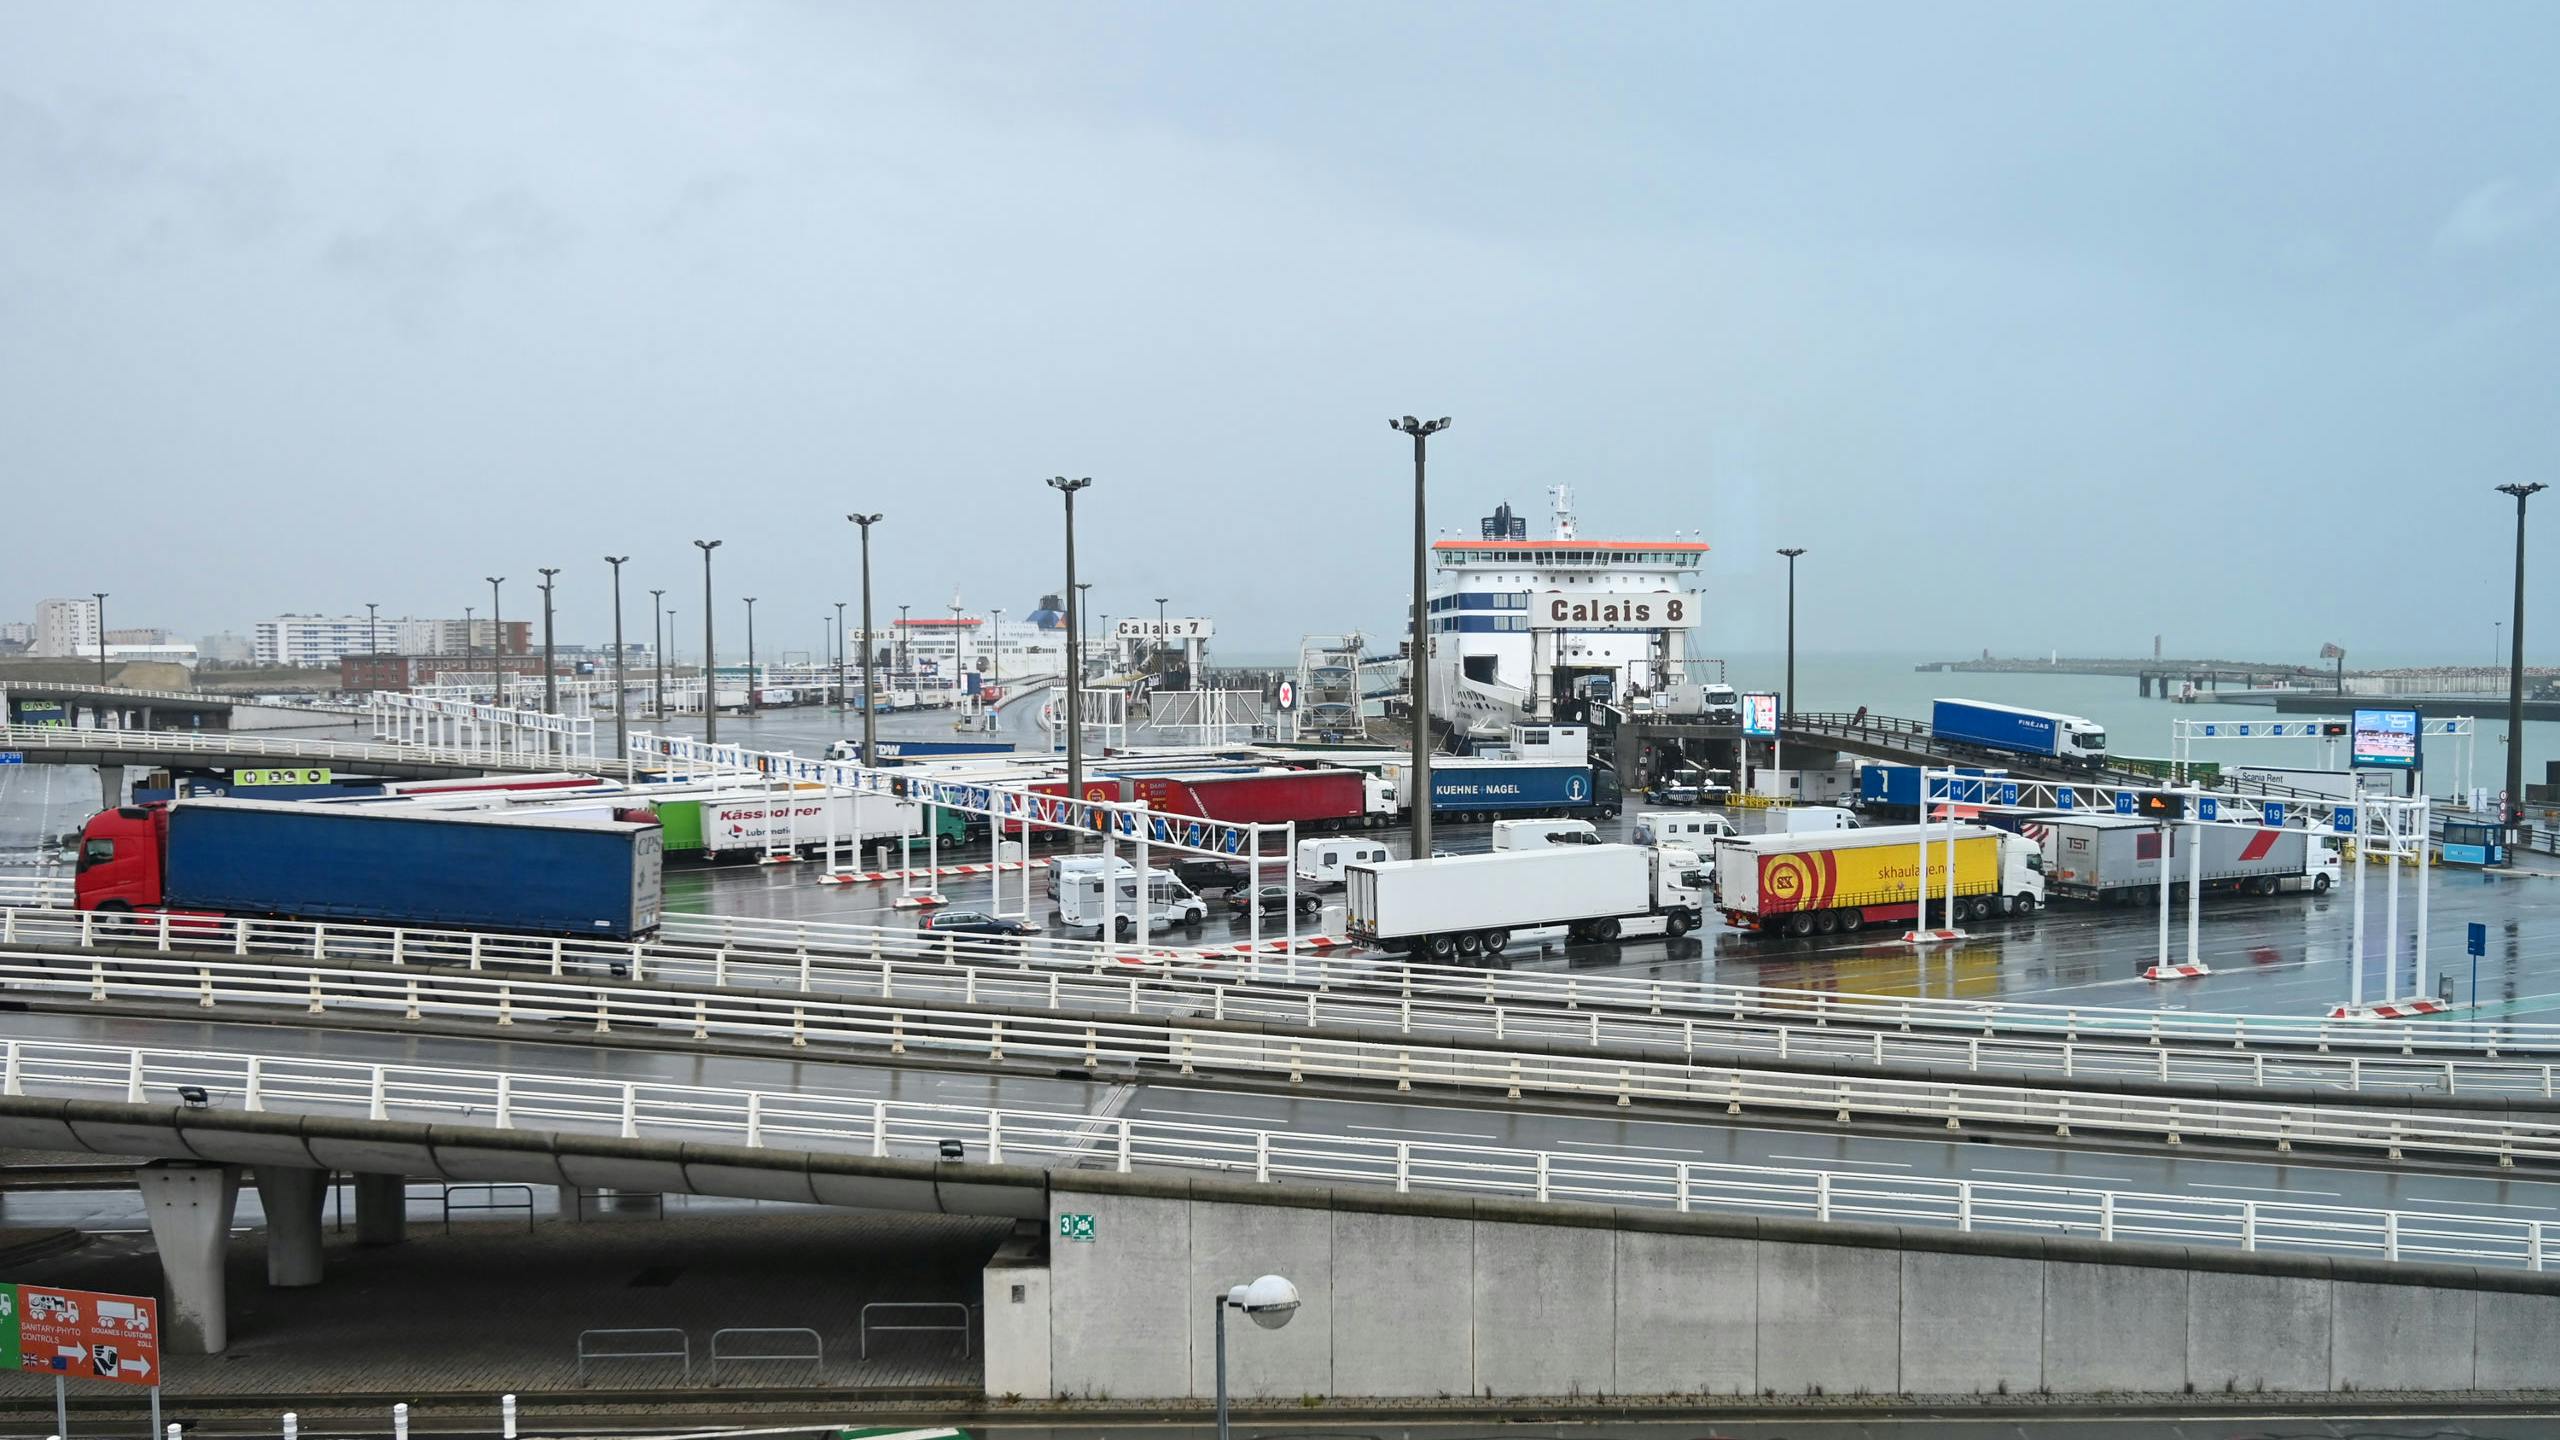 2019-09-24 12:55:40 A picture taken on September 24, 2019 during a day of test in case of Brexit shows a view of the terminal Ferry in Calais, northern France.  French customs officials on Tuesday carried out their third dress rehearsal for a no-deal Brexit in as many weeks, submitting trucks in Calais to border checks, which exporters fear could act as a brake on cross-Channel trade. DENIS CHARLET / POOL / AFP